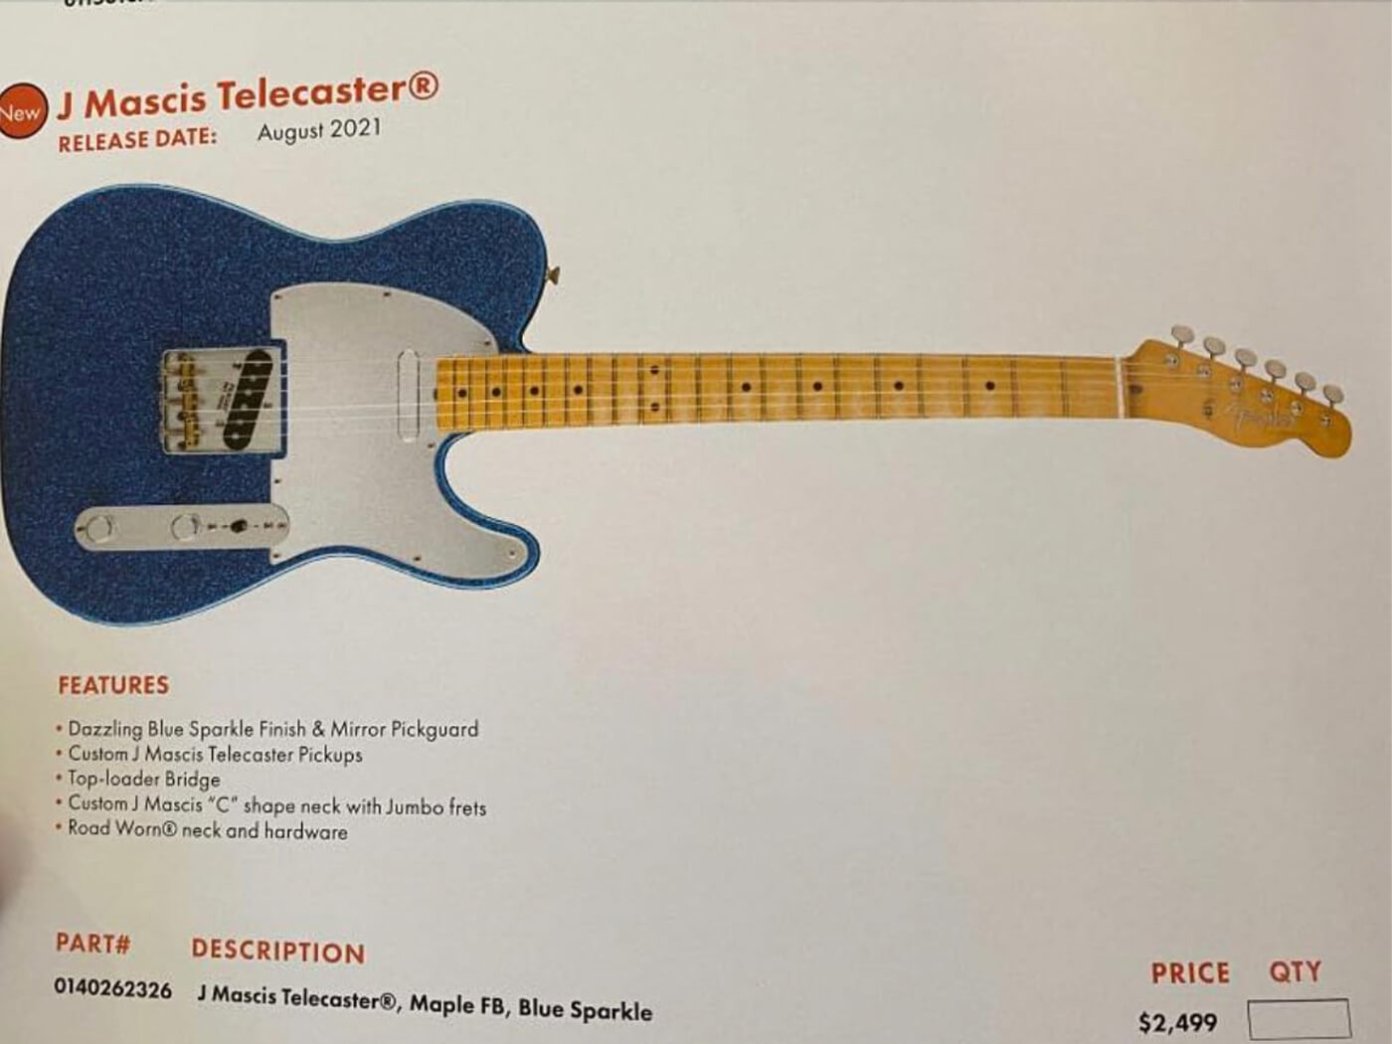 Fender J Mascis Telecaster May Be On The Way According To Online Leak 